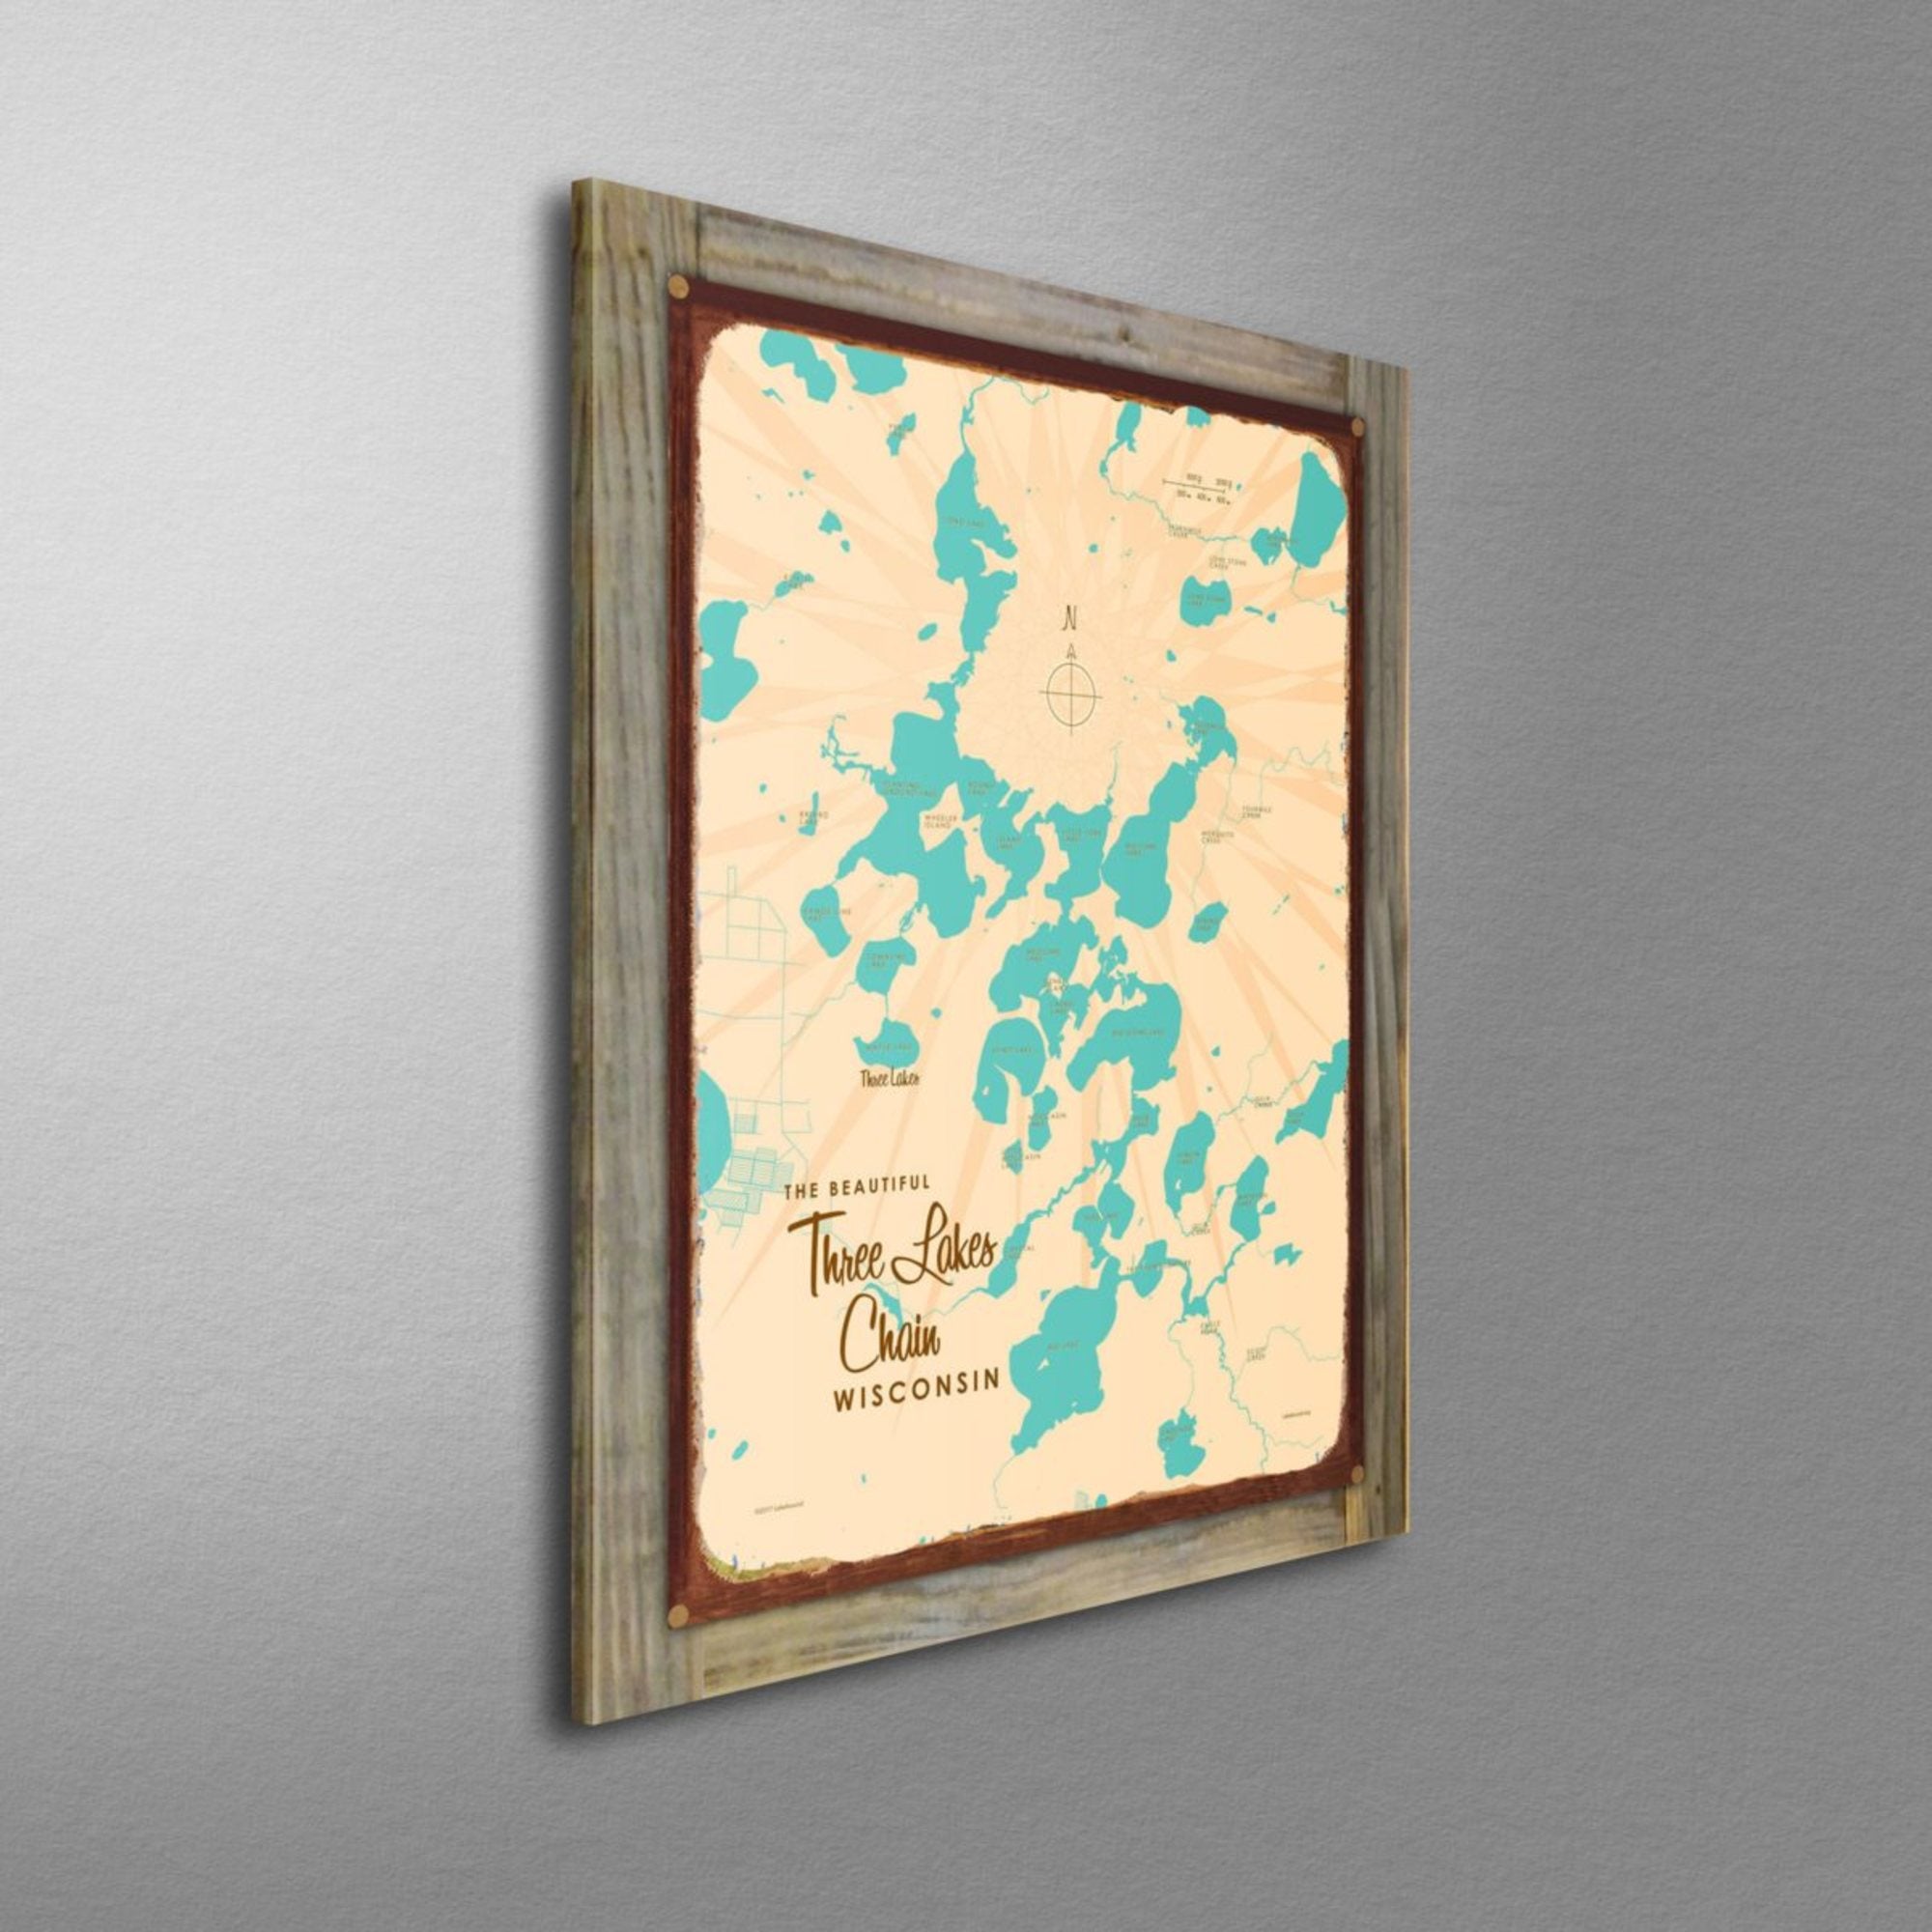 Three Lakes Chain Wisconsin, Wood-Mounted Rustic Metal Sign Map Art